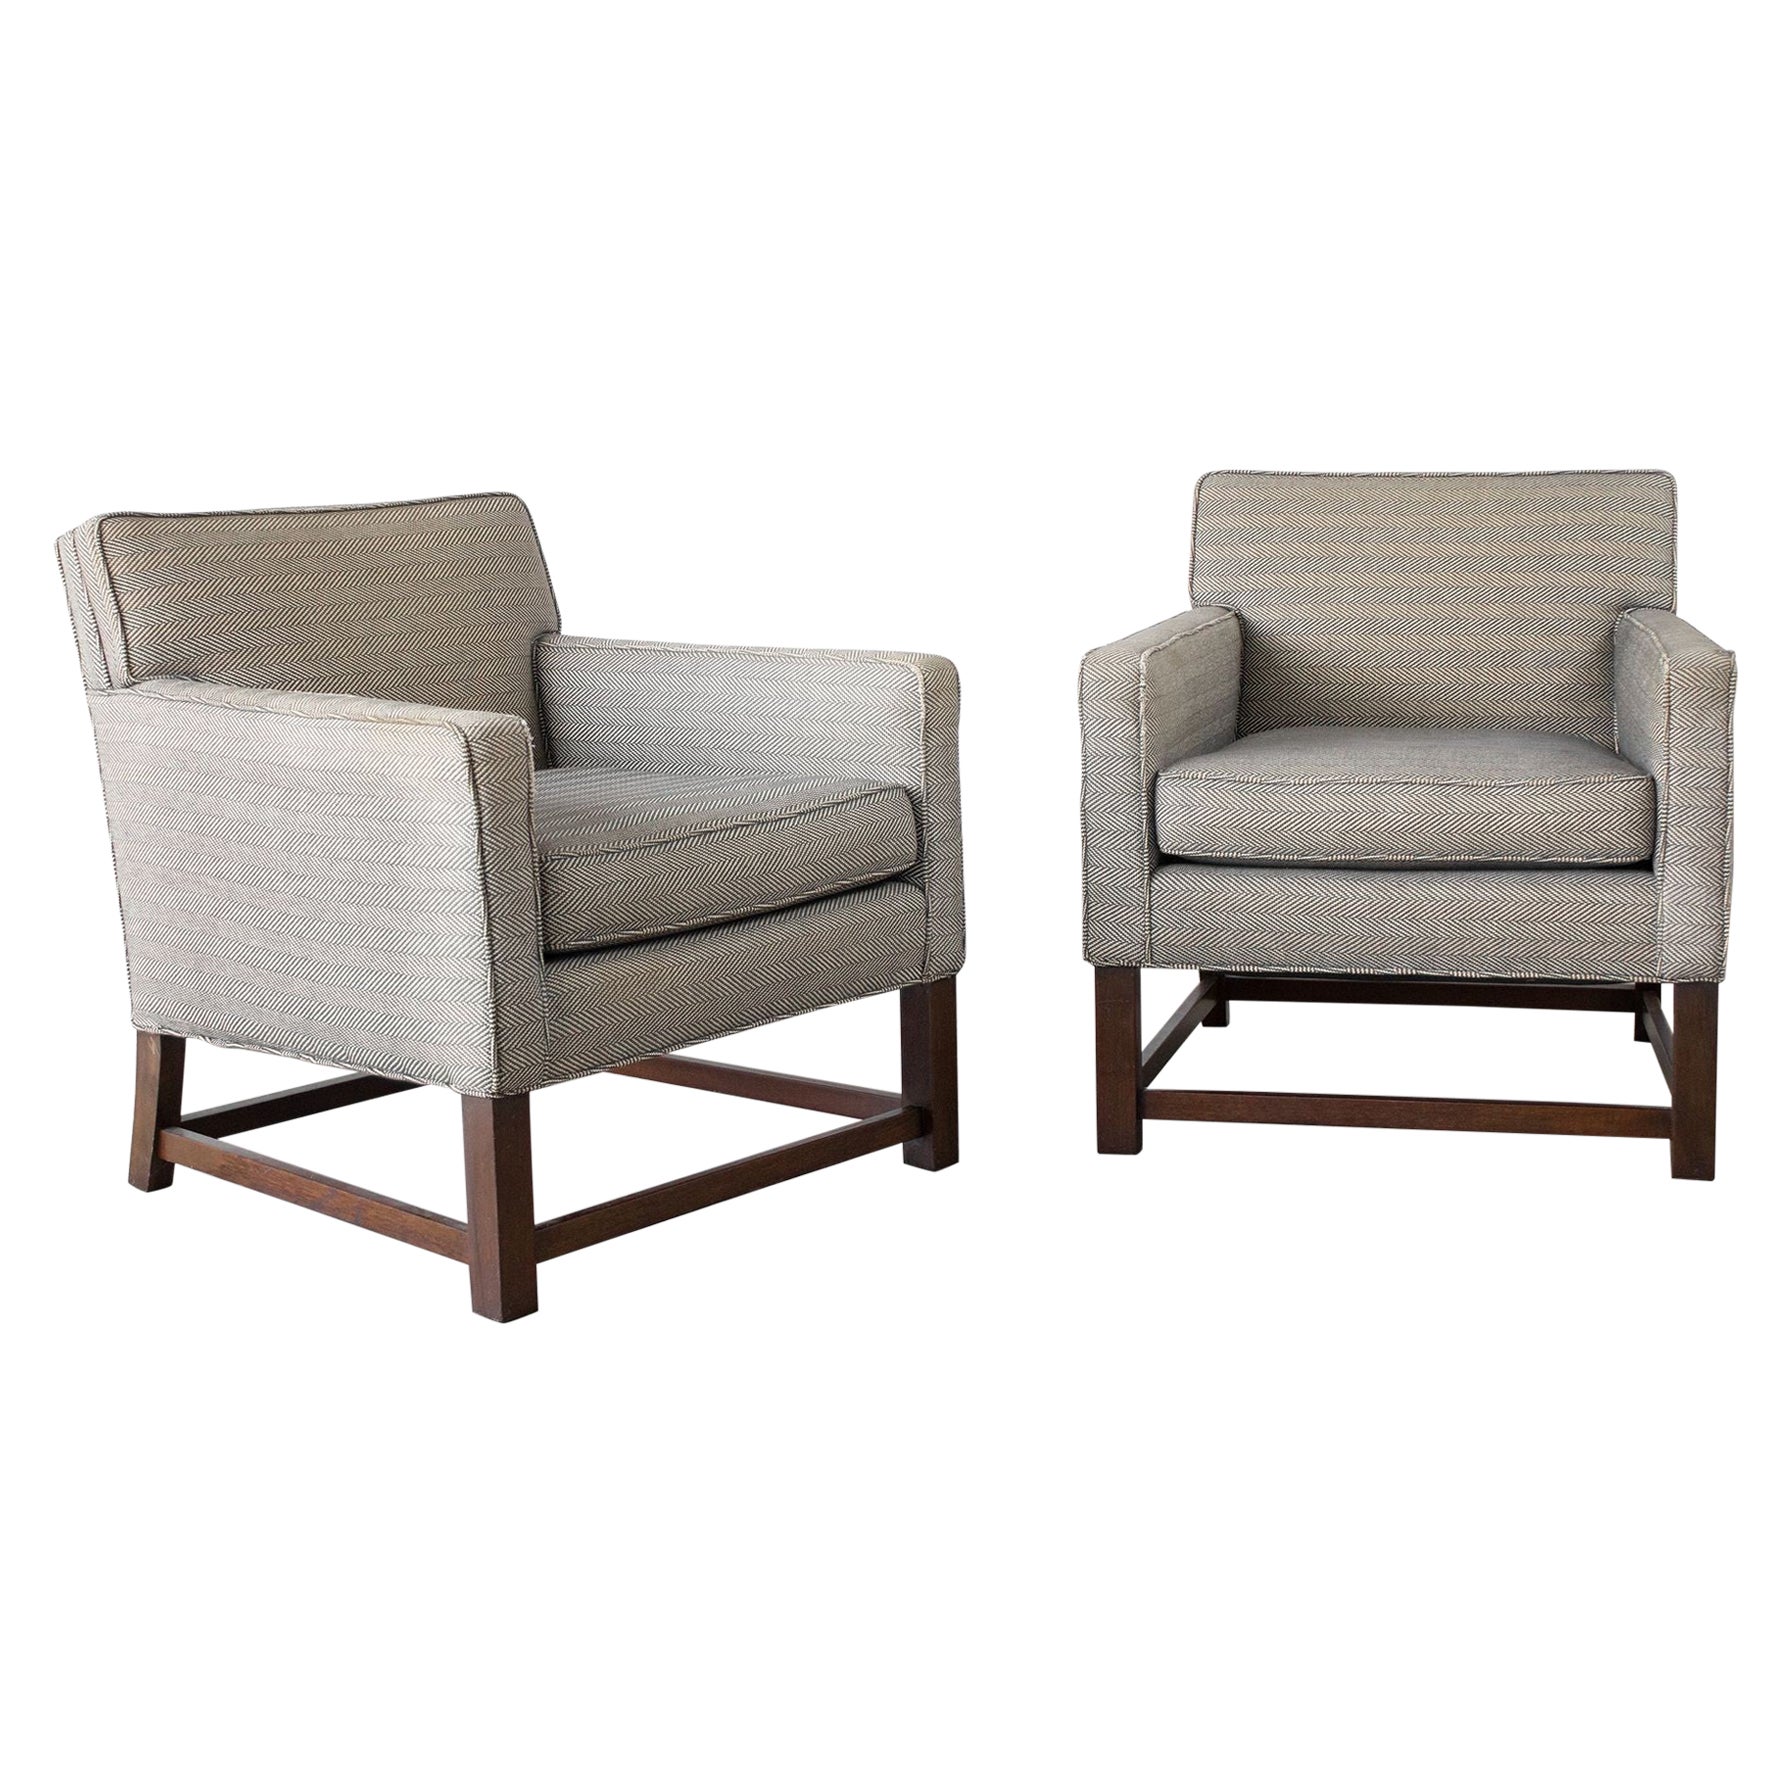 Tommi Parzinger Classic Modern Pair of Club Chairs in Mahogany, 1960s